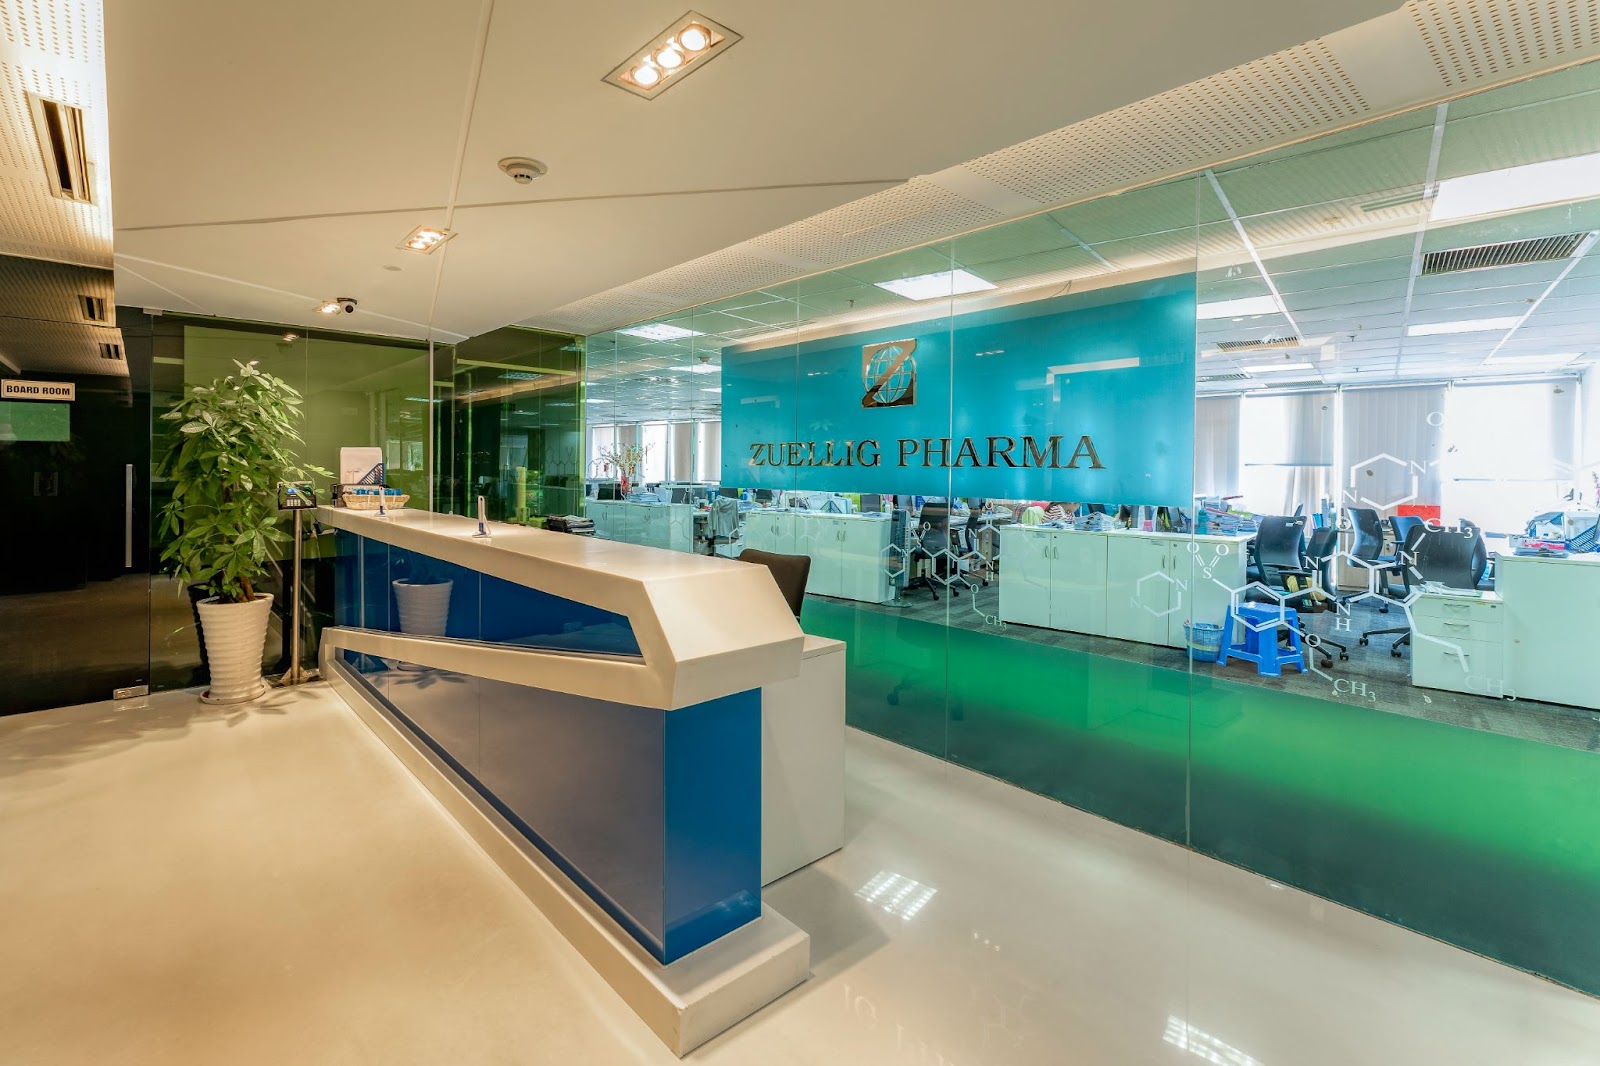 How To Apply Amazing Office Reception Area Ideas For Your Company